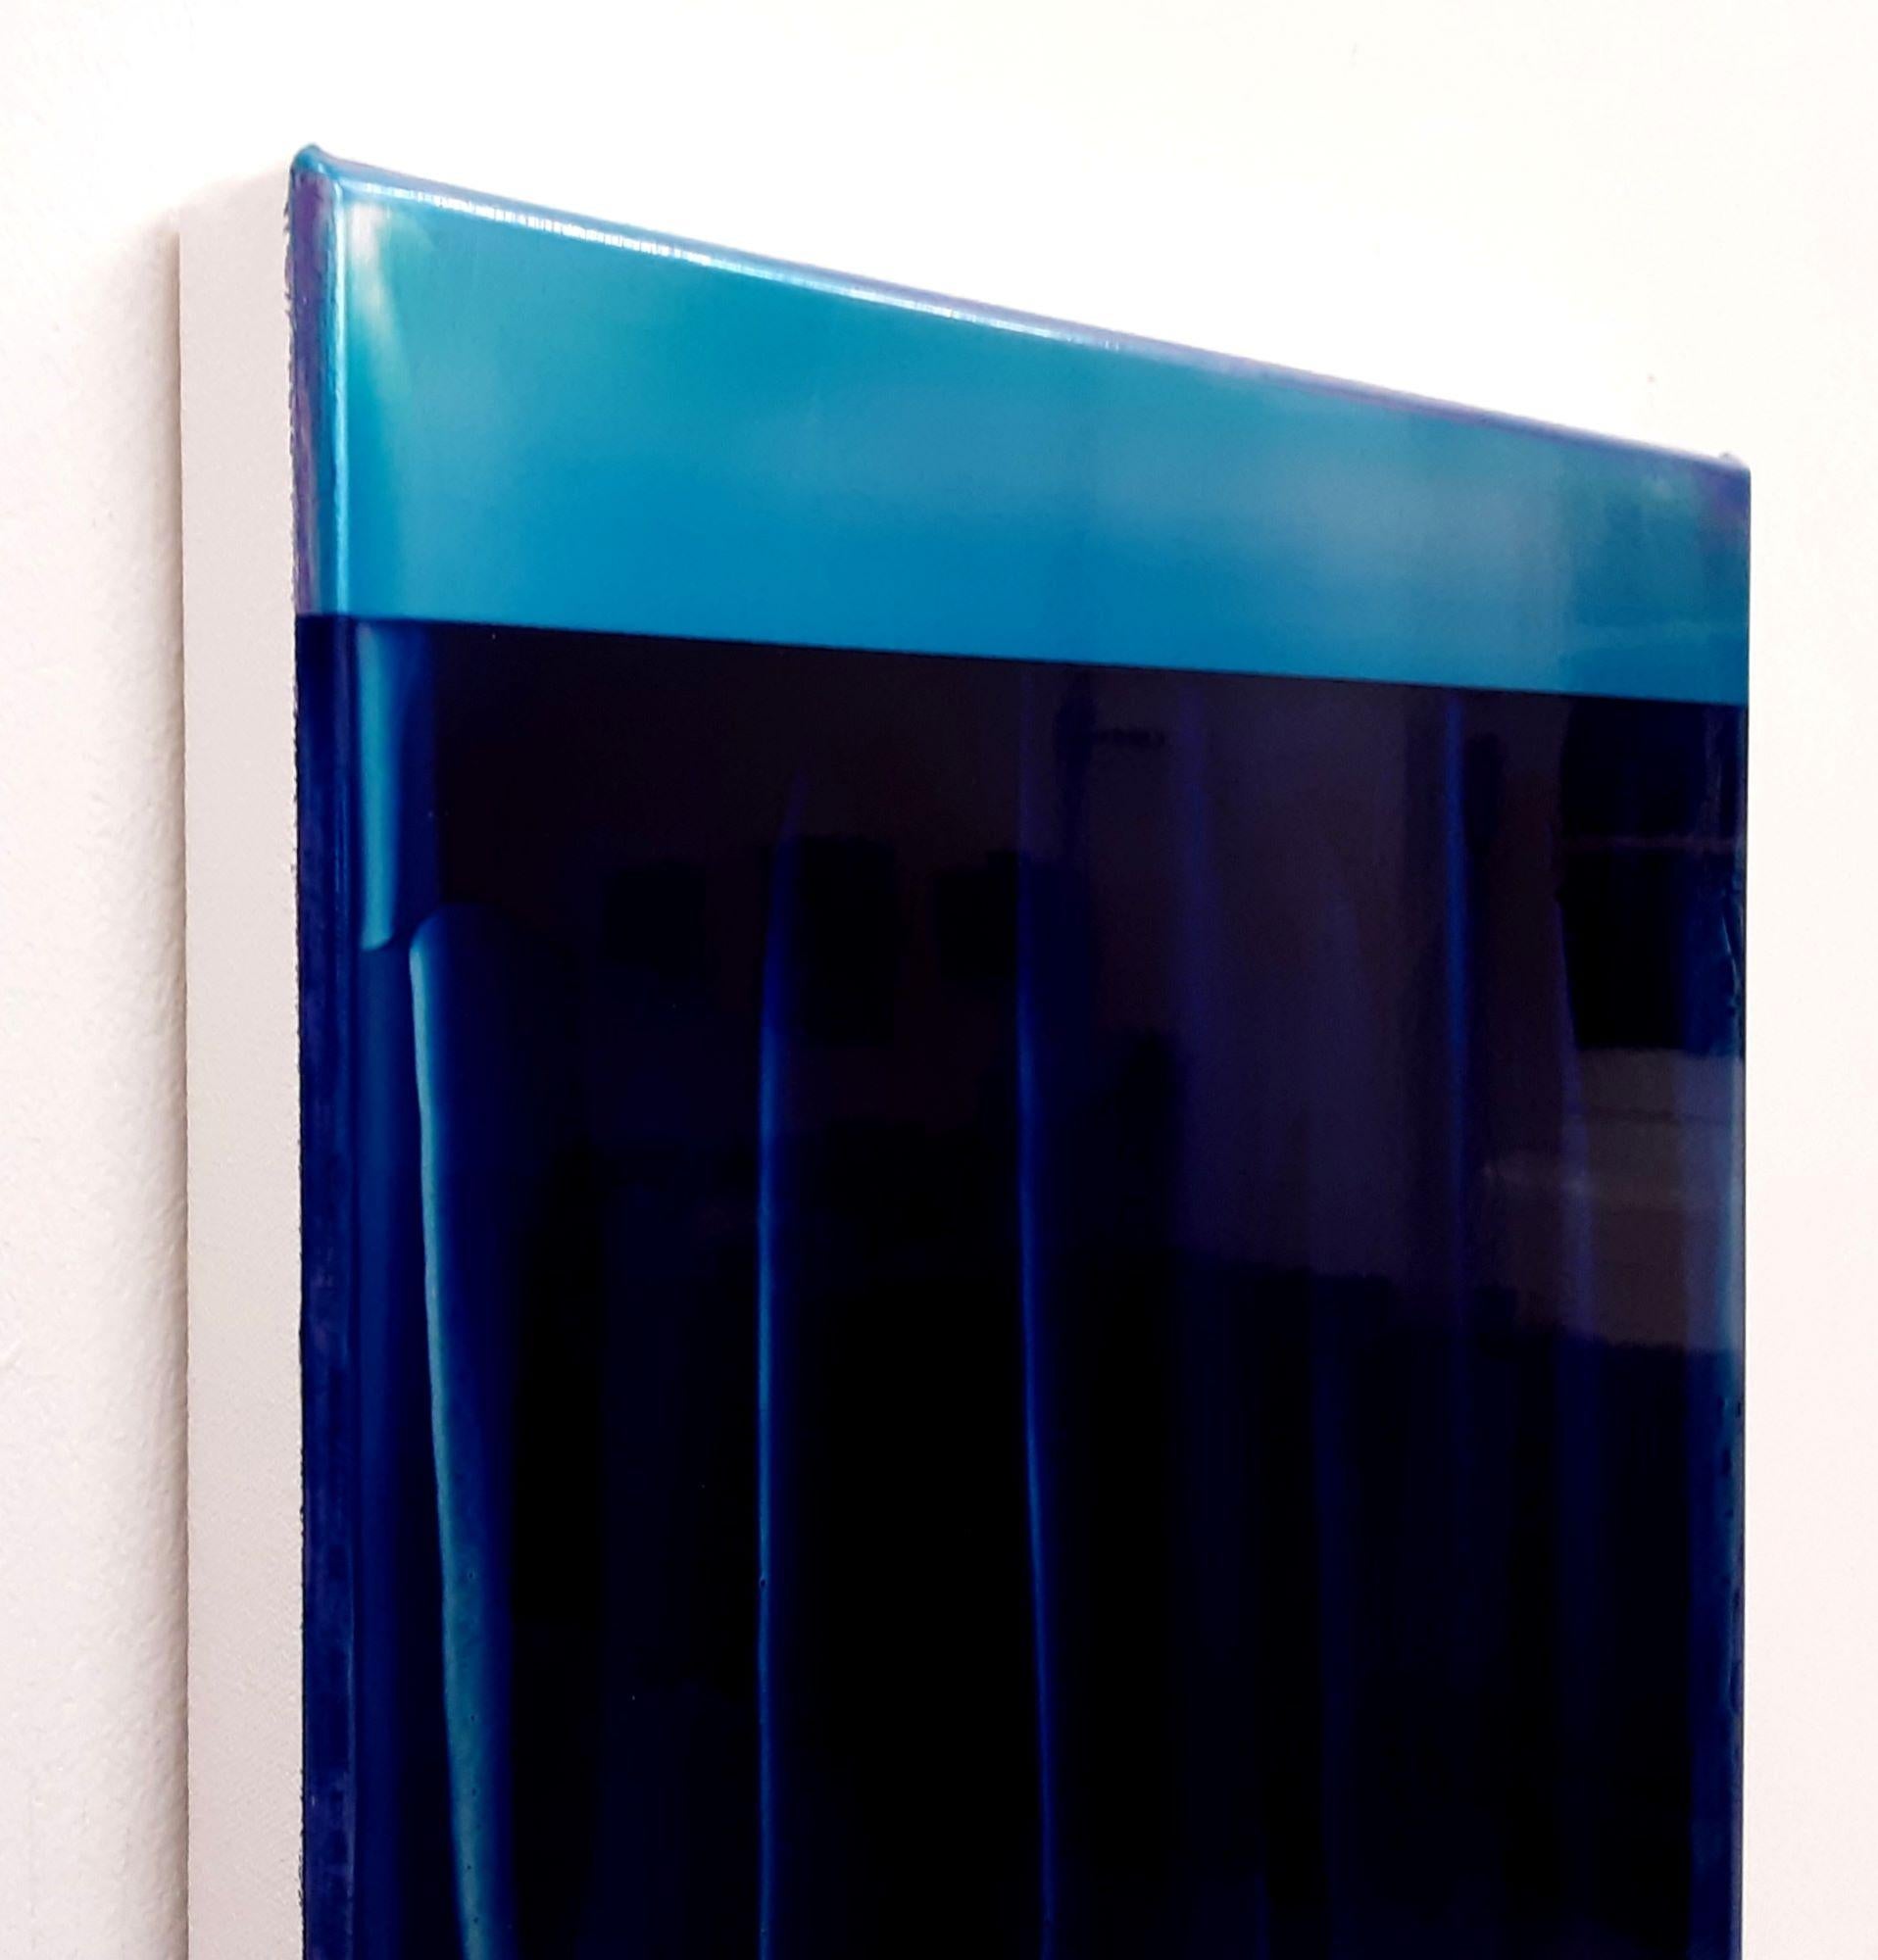 Point Series (Strata) 27 by James Lumsden - Abstract colour painting, blue tones For Sale 4